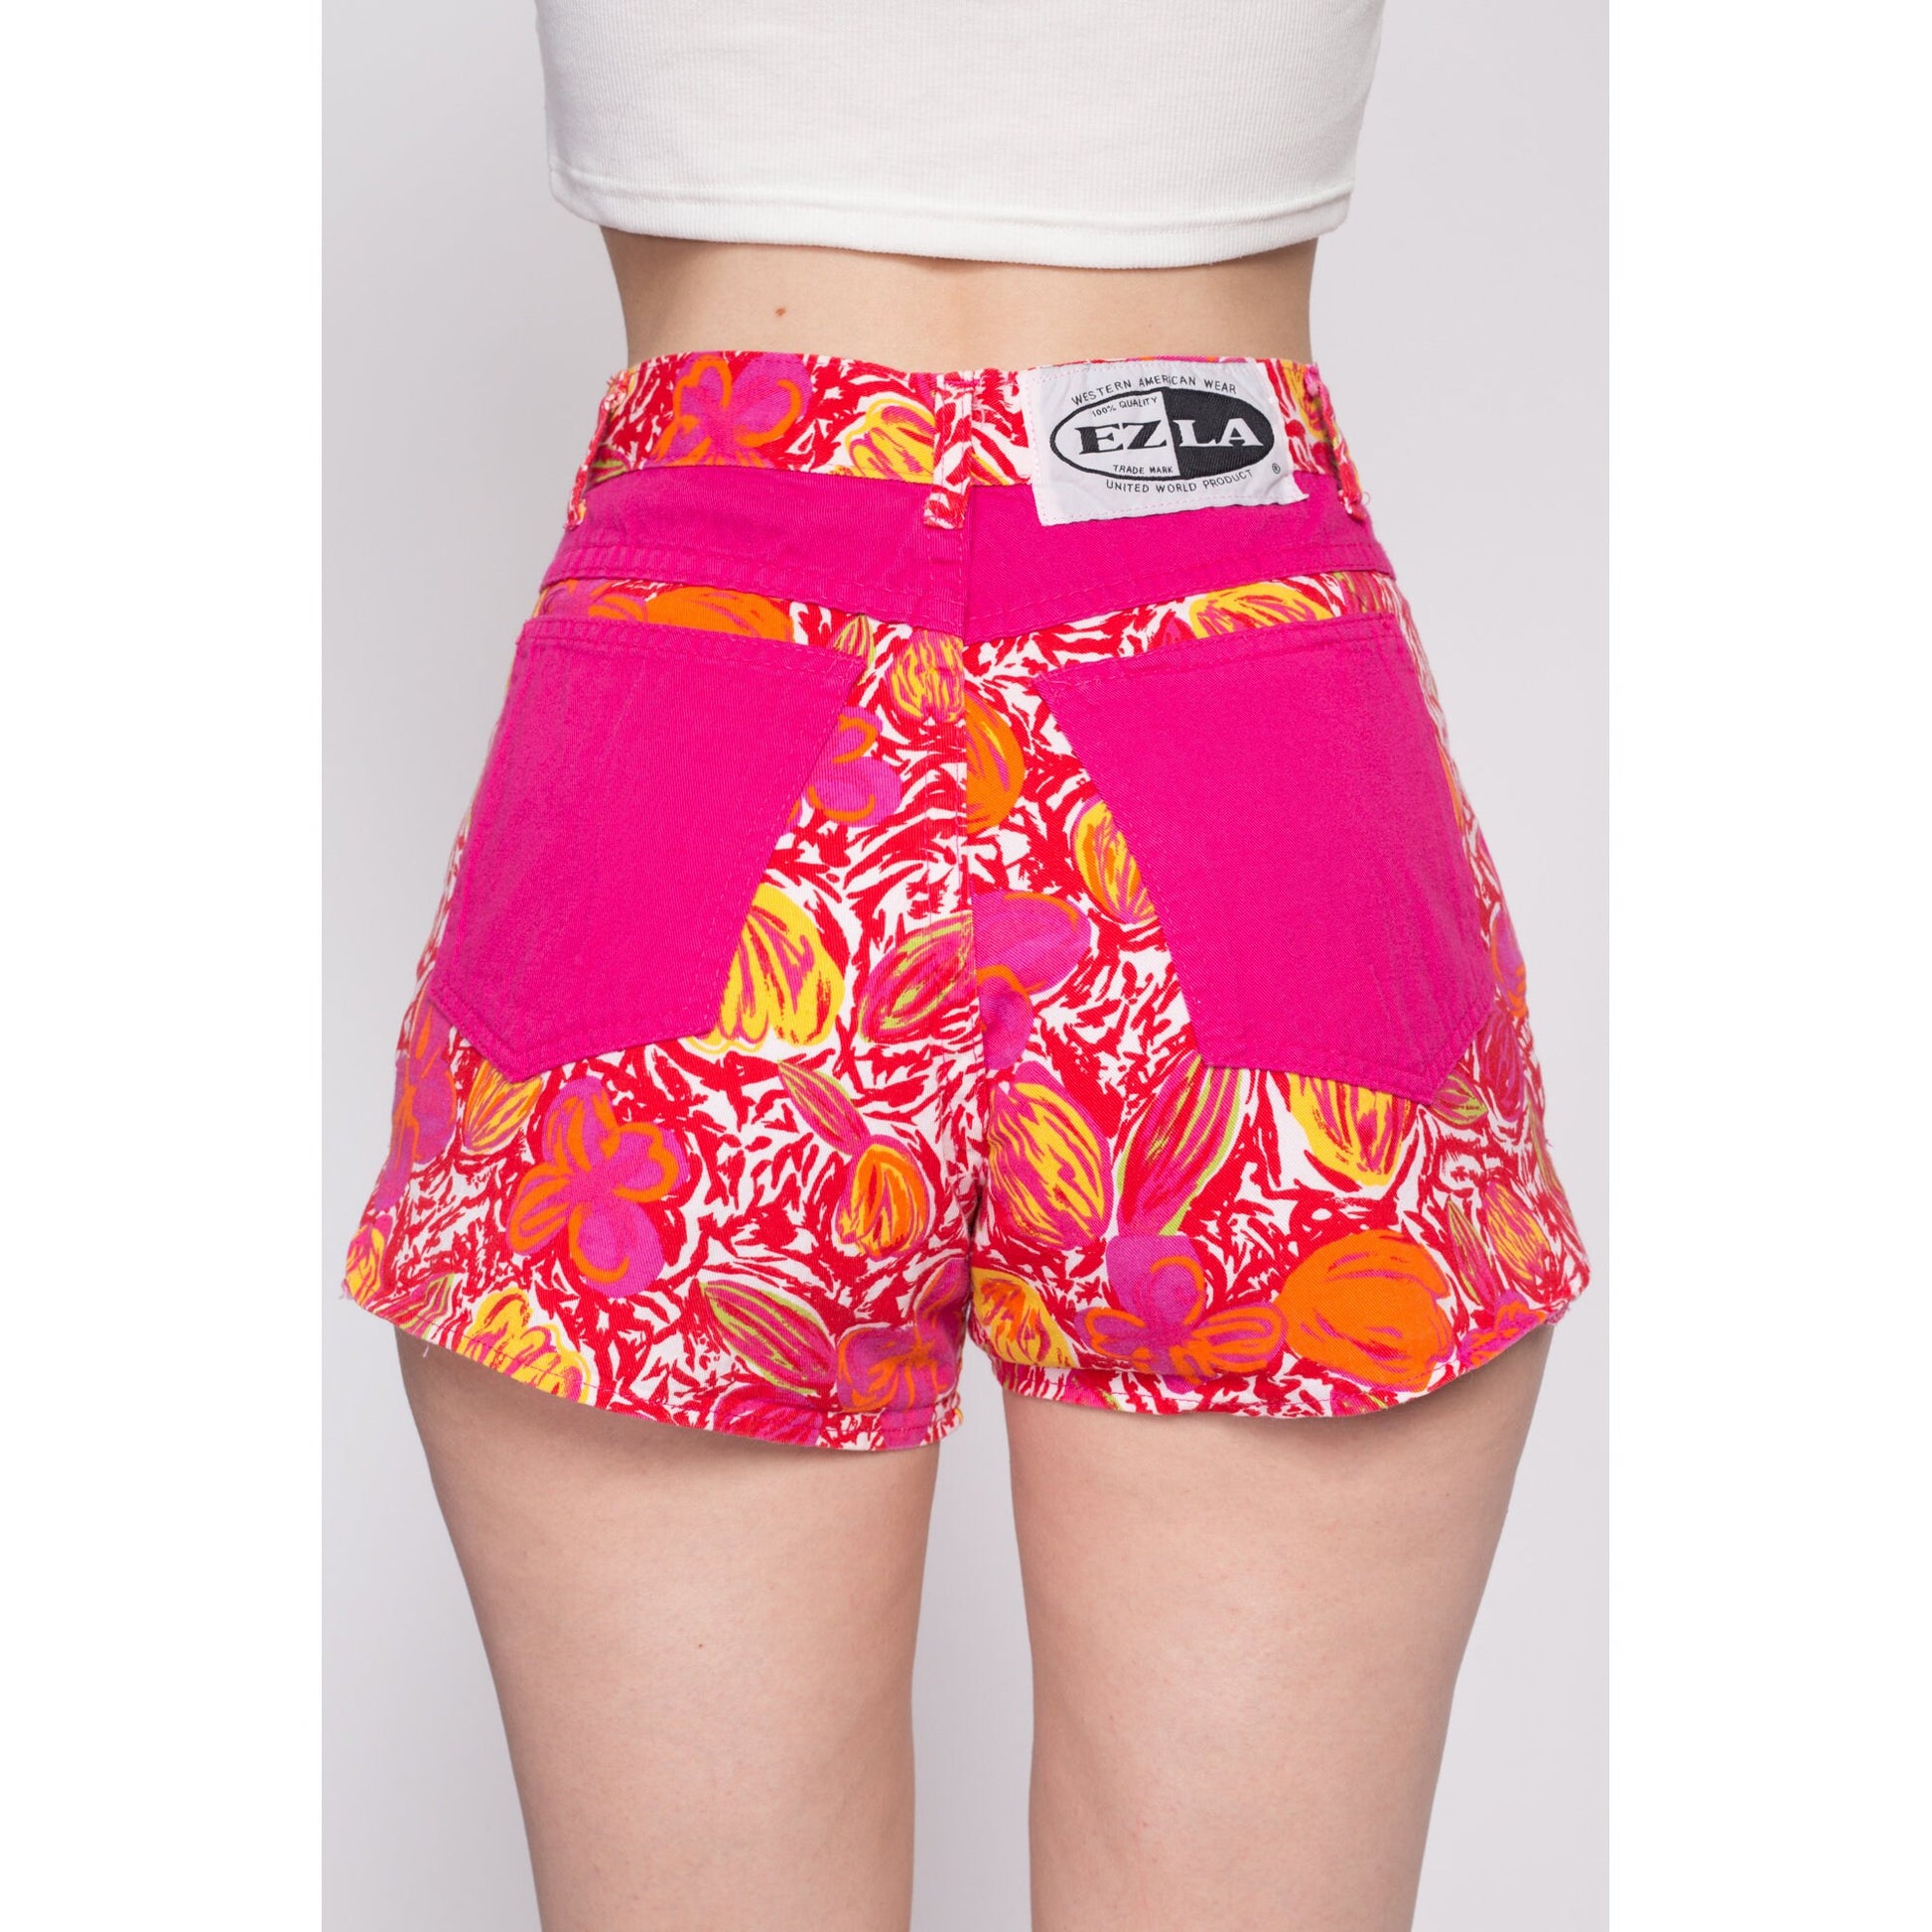 90s Hot Pink Floral Shorts - XS to Small | Vintage High Waisted Cotton Denim Retro Mini Cheeky Shorts